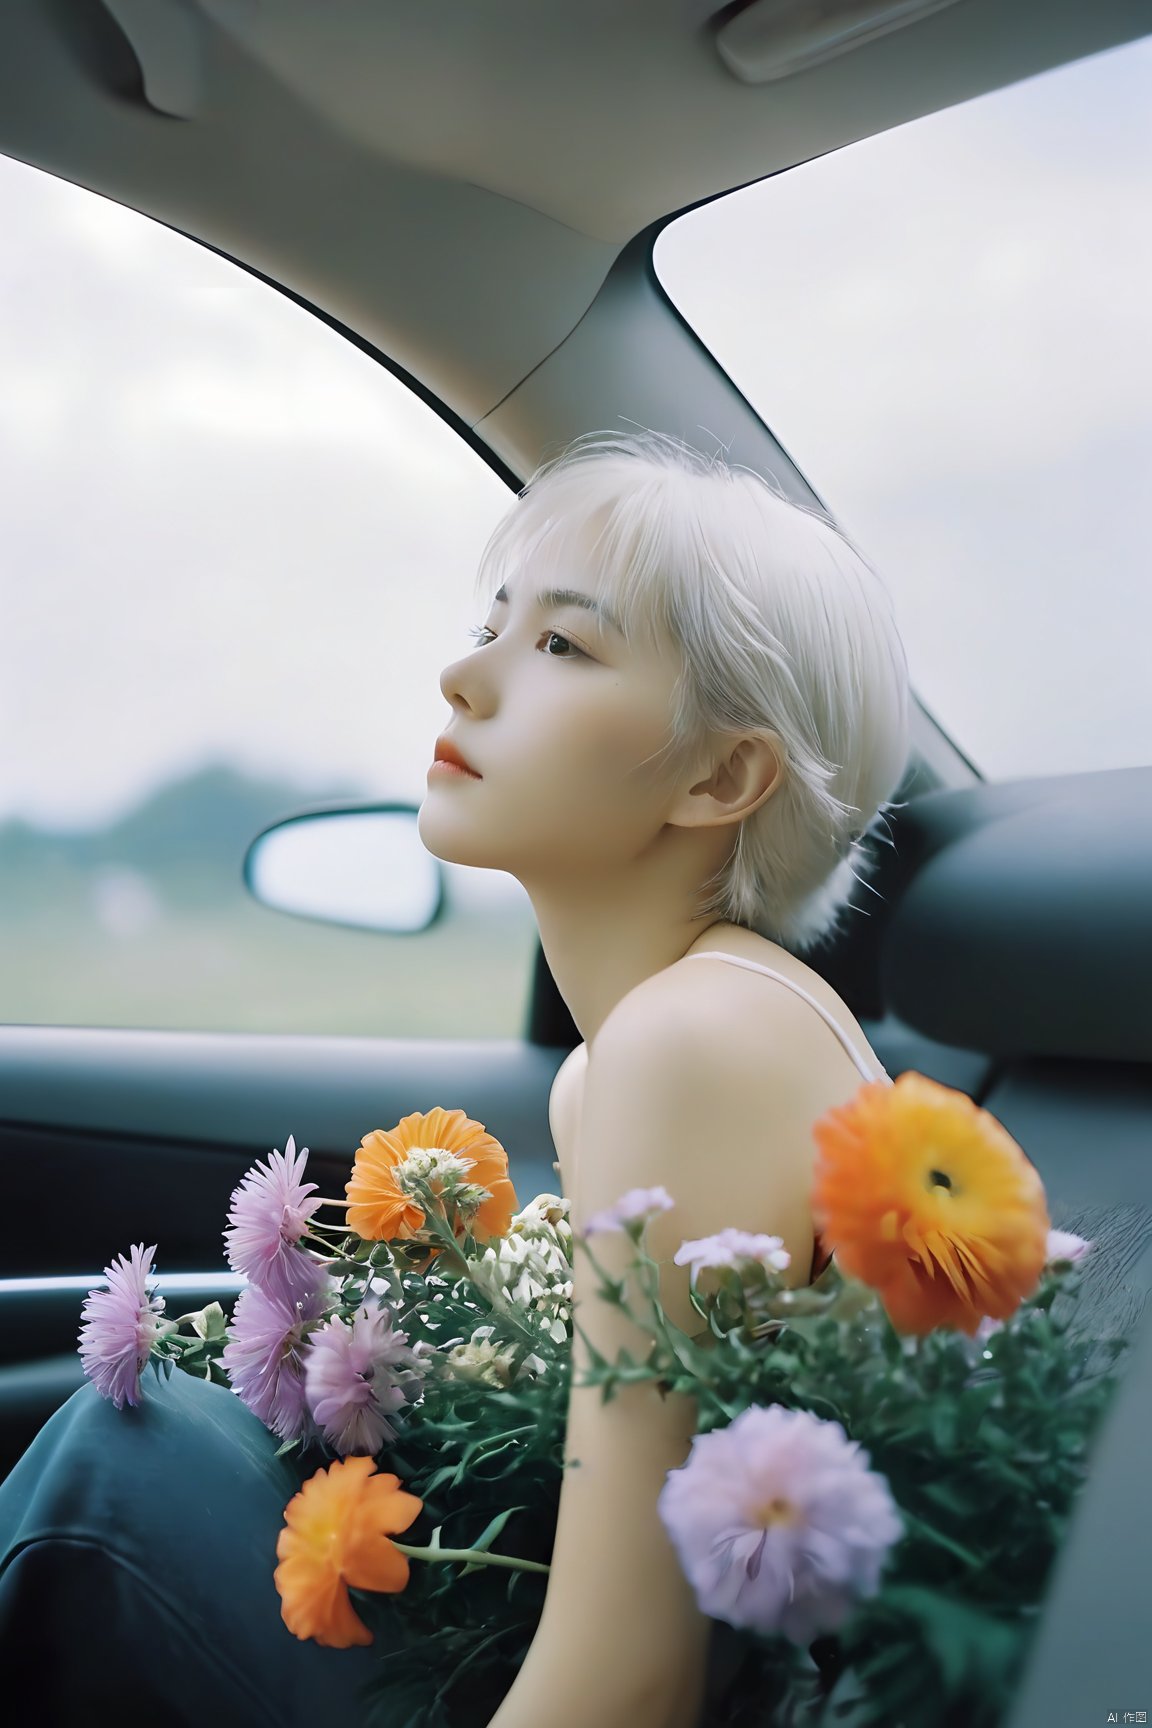  A young girl with white hair sitting in car filled with flowers,art by Rinko Kawauchi,in the styleof naturalistic poses,vacation dadcore,youth fulenergy,a coolexpression,body extensions,flowers in the sky,analog film,super detail,dreamy lofiphotography,(colourful),covered in flowers anovines,(Inside view:1.5),shot on fuiifilm XT4,Inside car,(red|yellow|orange|purple|blue flower),a large number of flowers grow inside the car,a scene full of illusions,perspective taken from the interior of a car,the girl leaned lazily in the car,white hair,